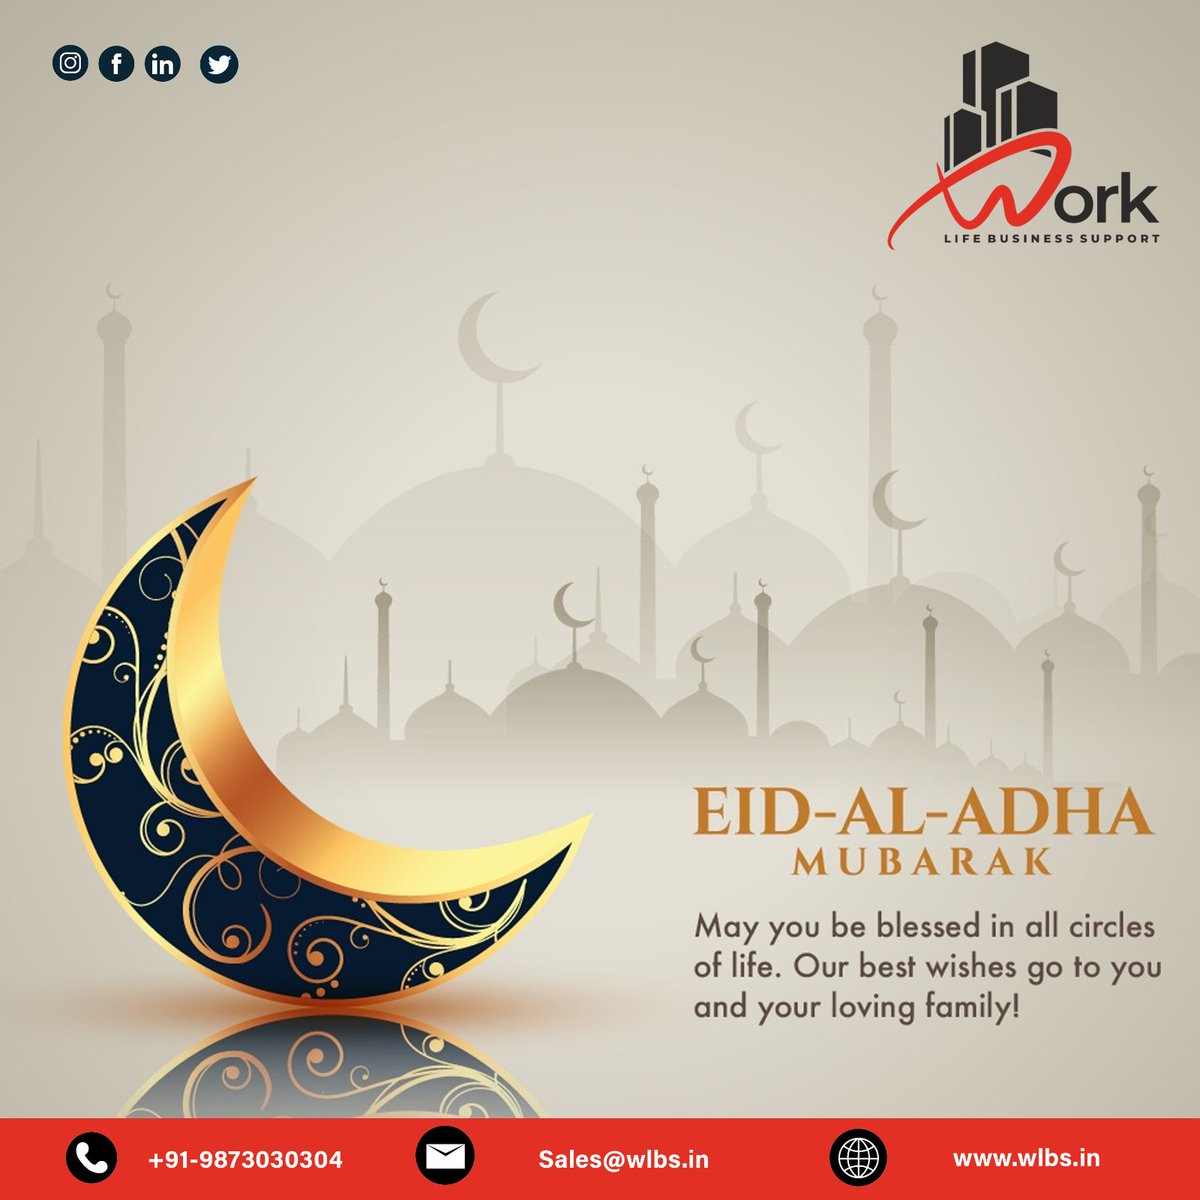 Wishing you a joyous Eid-ul-Adha filled with blessings, happiness, and the warmth of loved ones.

Contact us for more info: 👇
🌐 wlbs.in
📞 +91-9873030304
📧 sales@wlbs.in 

#EidInRealEstate
#HomeSweetEid
#PropertyBlessings
#EidDreamHomes
#RealEstateEidVibes